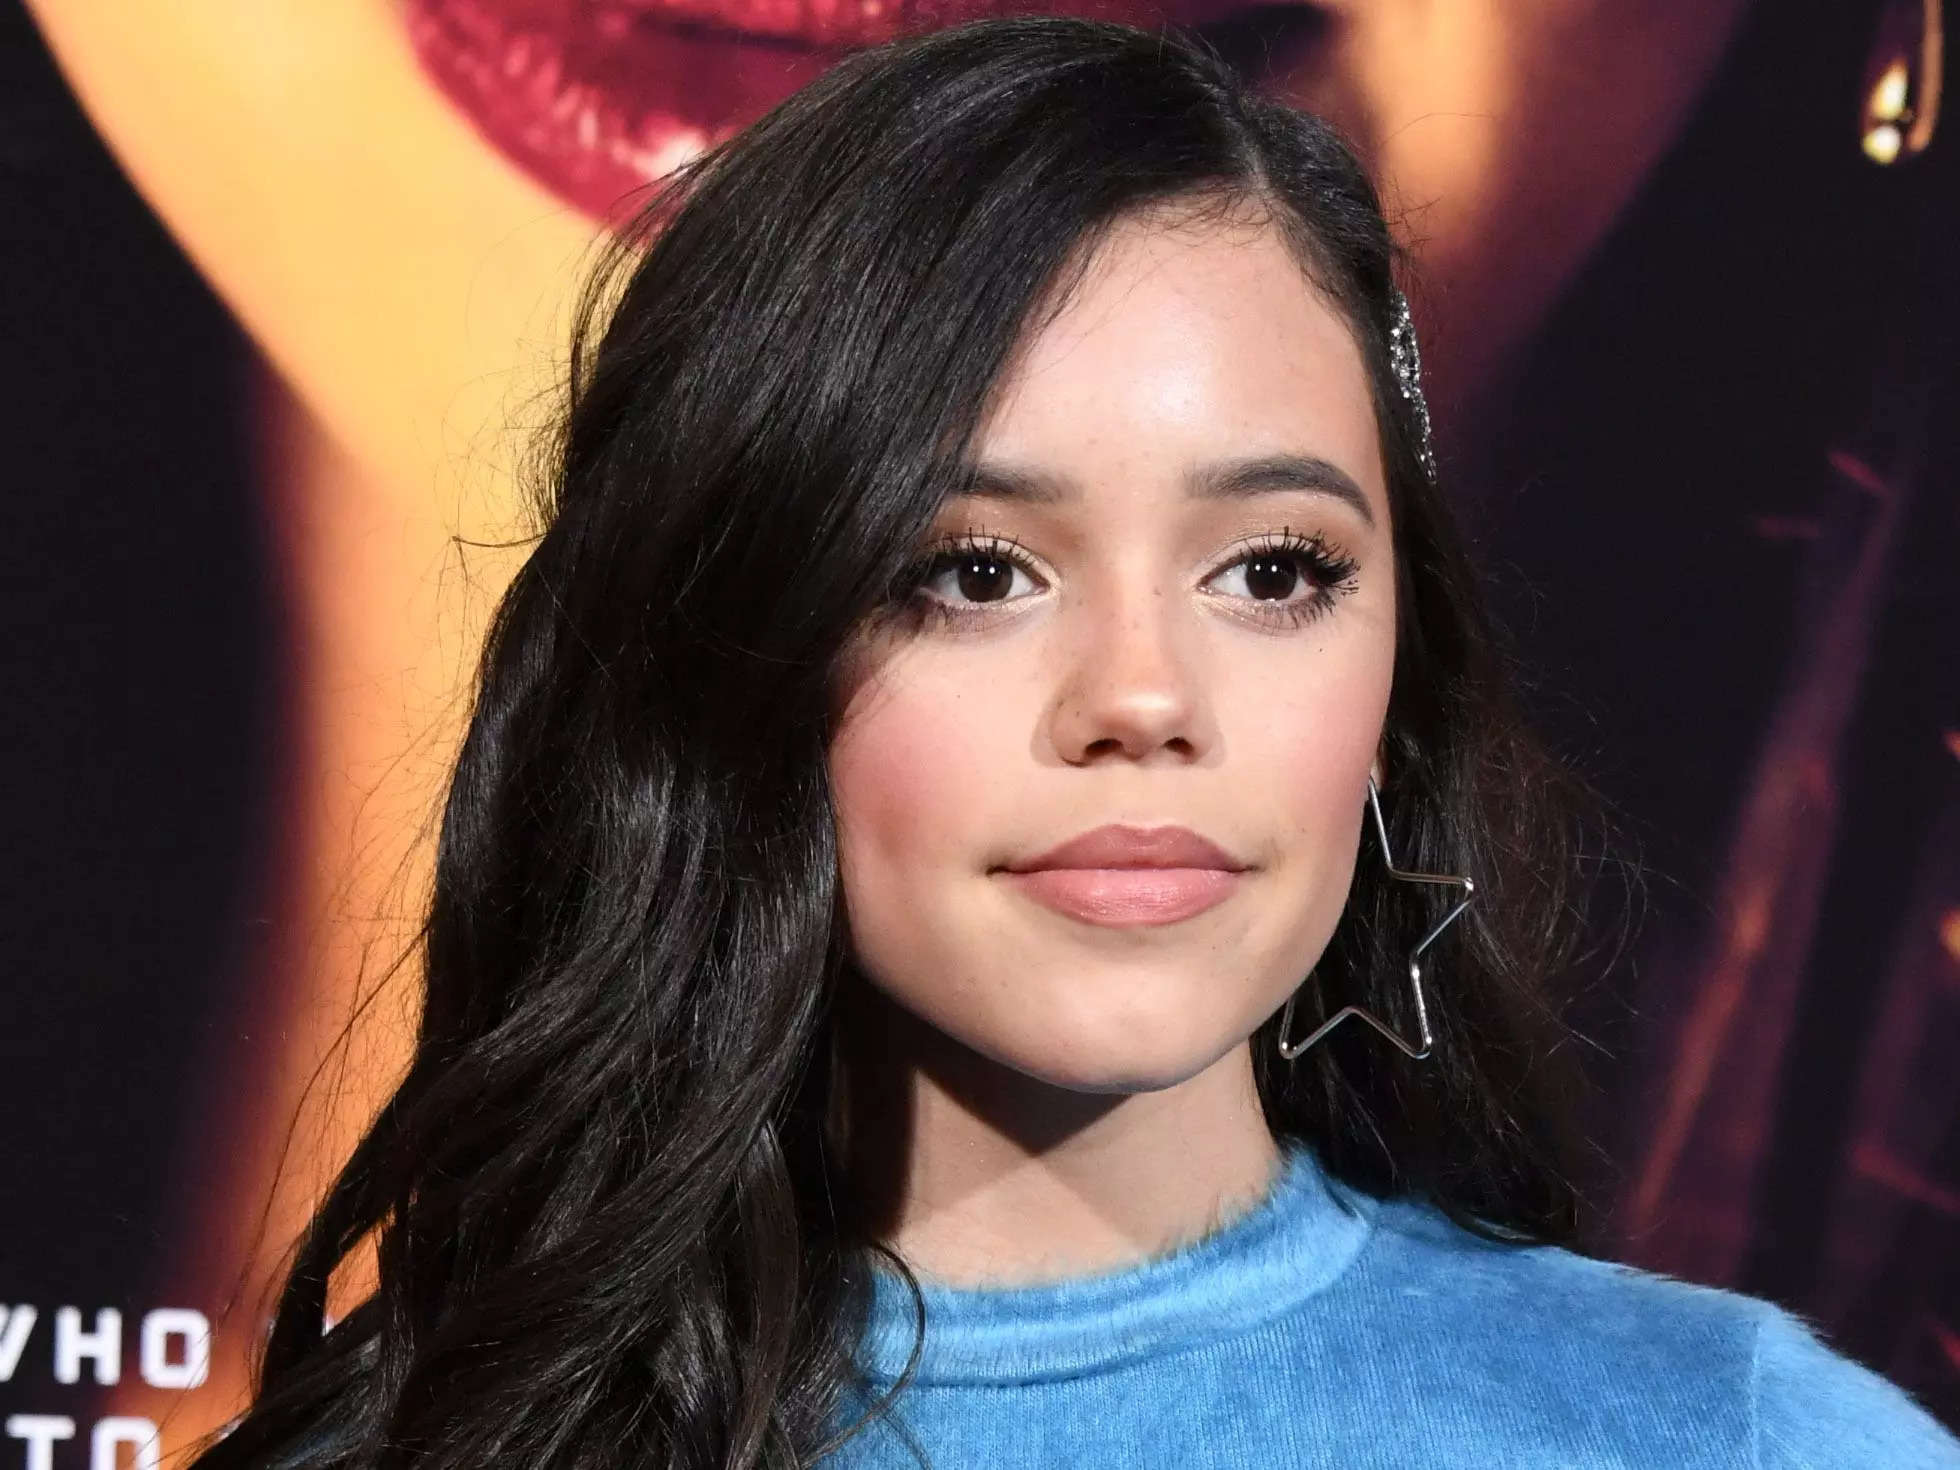 'Wednesday' star Jenna Ortega says she was a 'weirdo' who performed autopsies on animals when she was younger - Business Insider